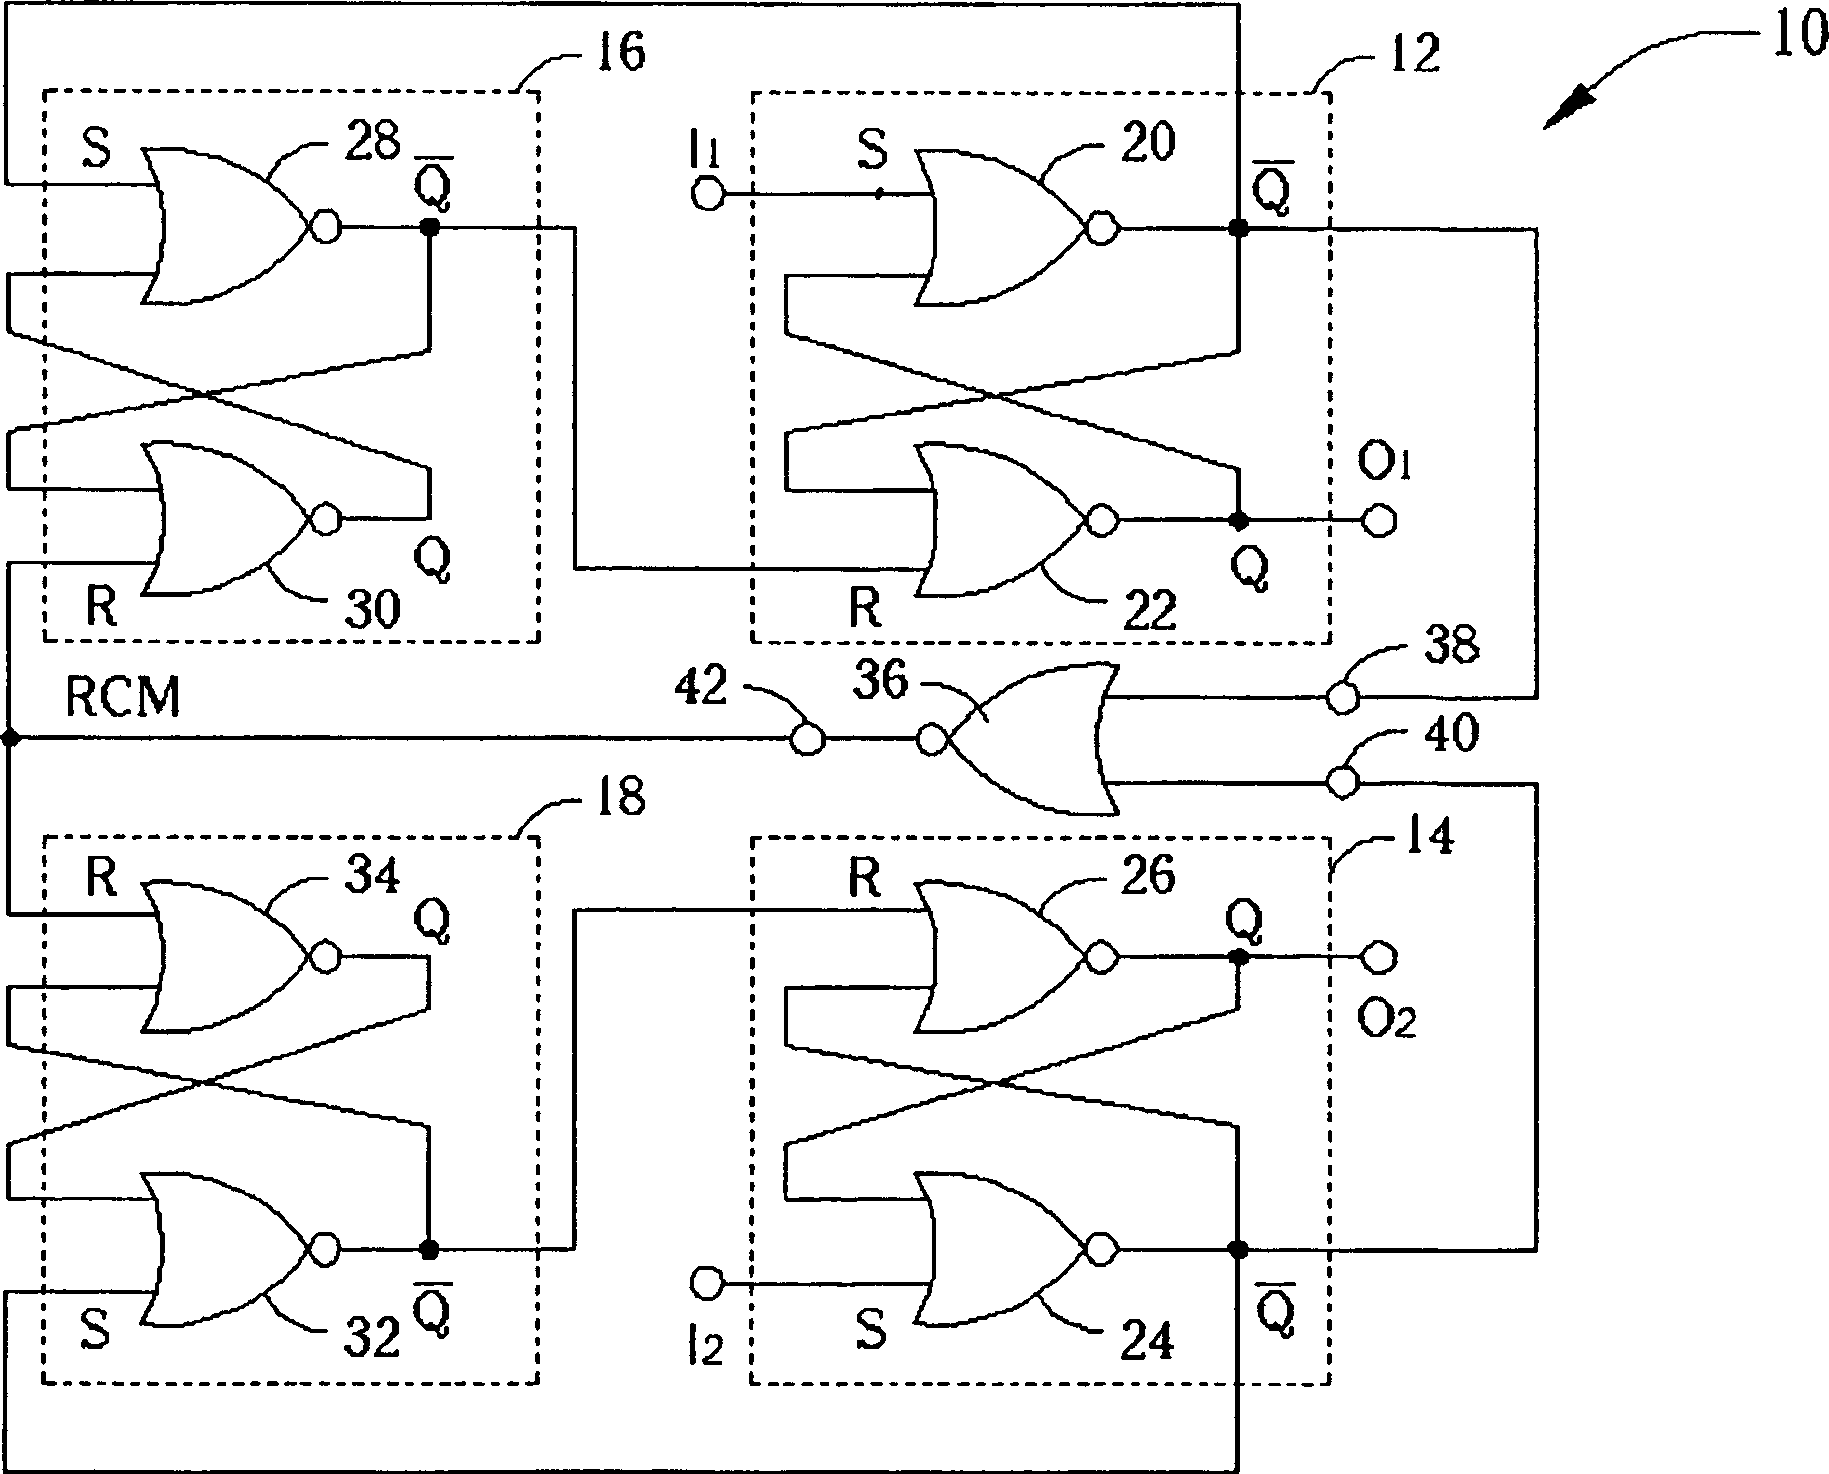 Digital phase-frequency identification circuit